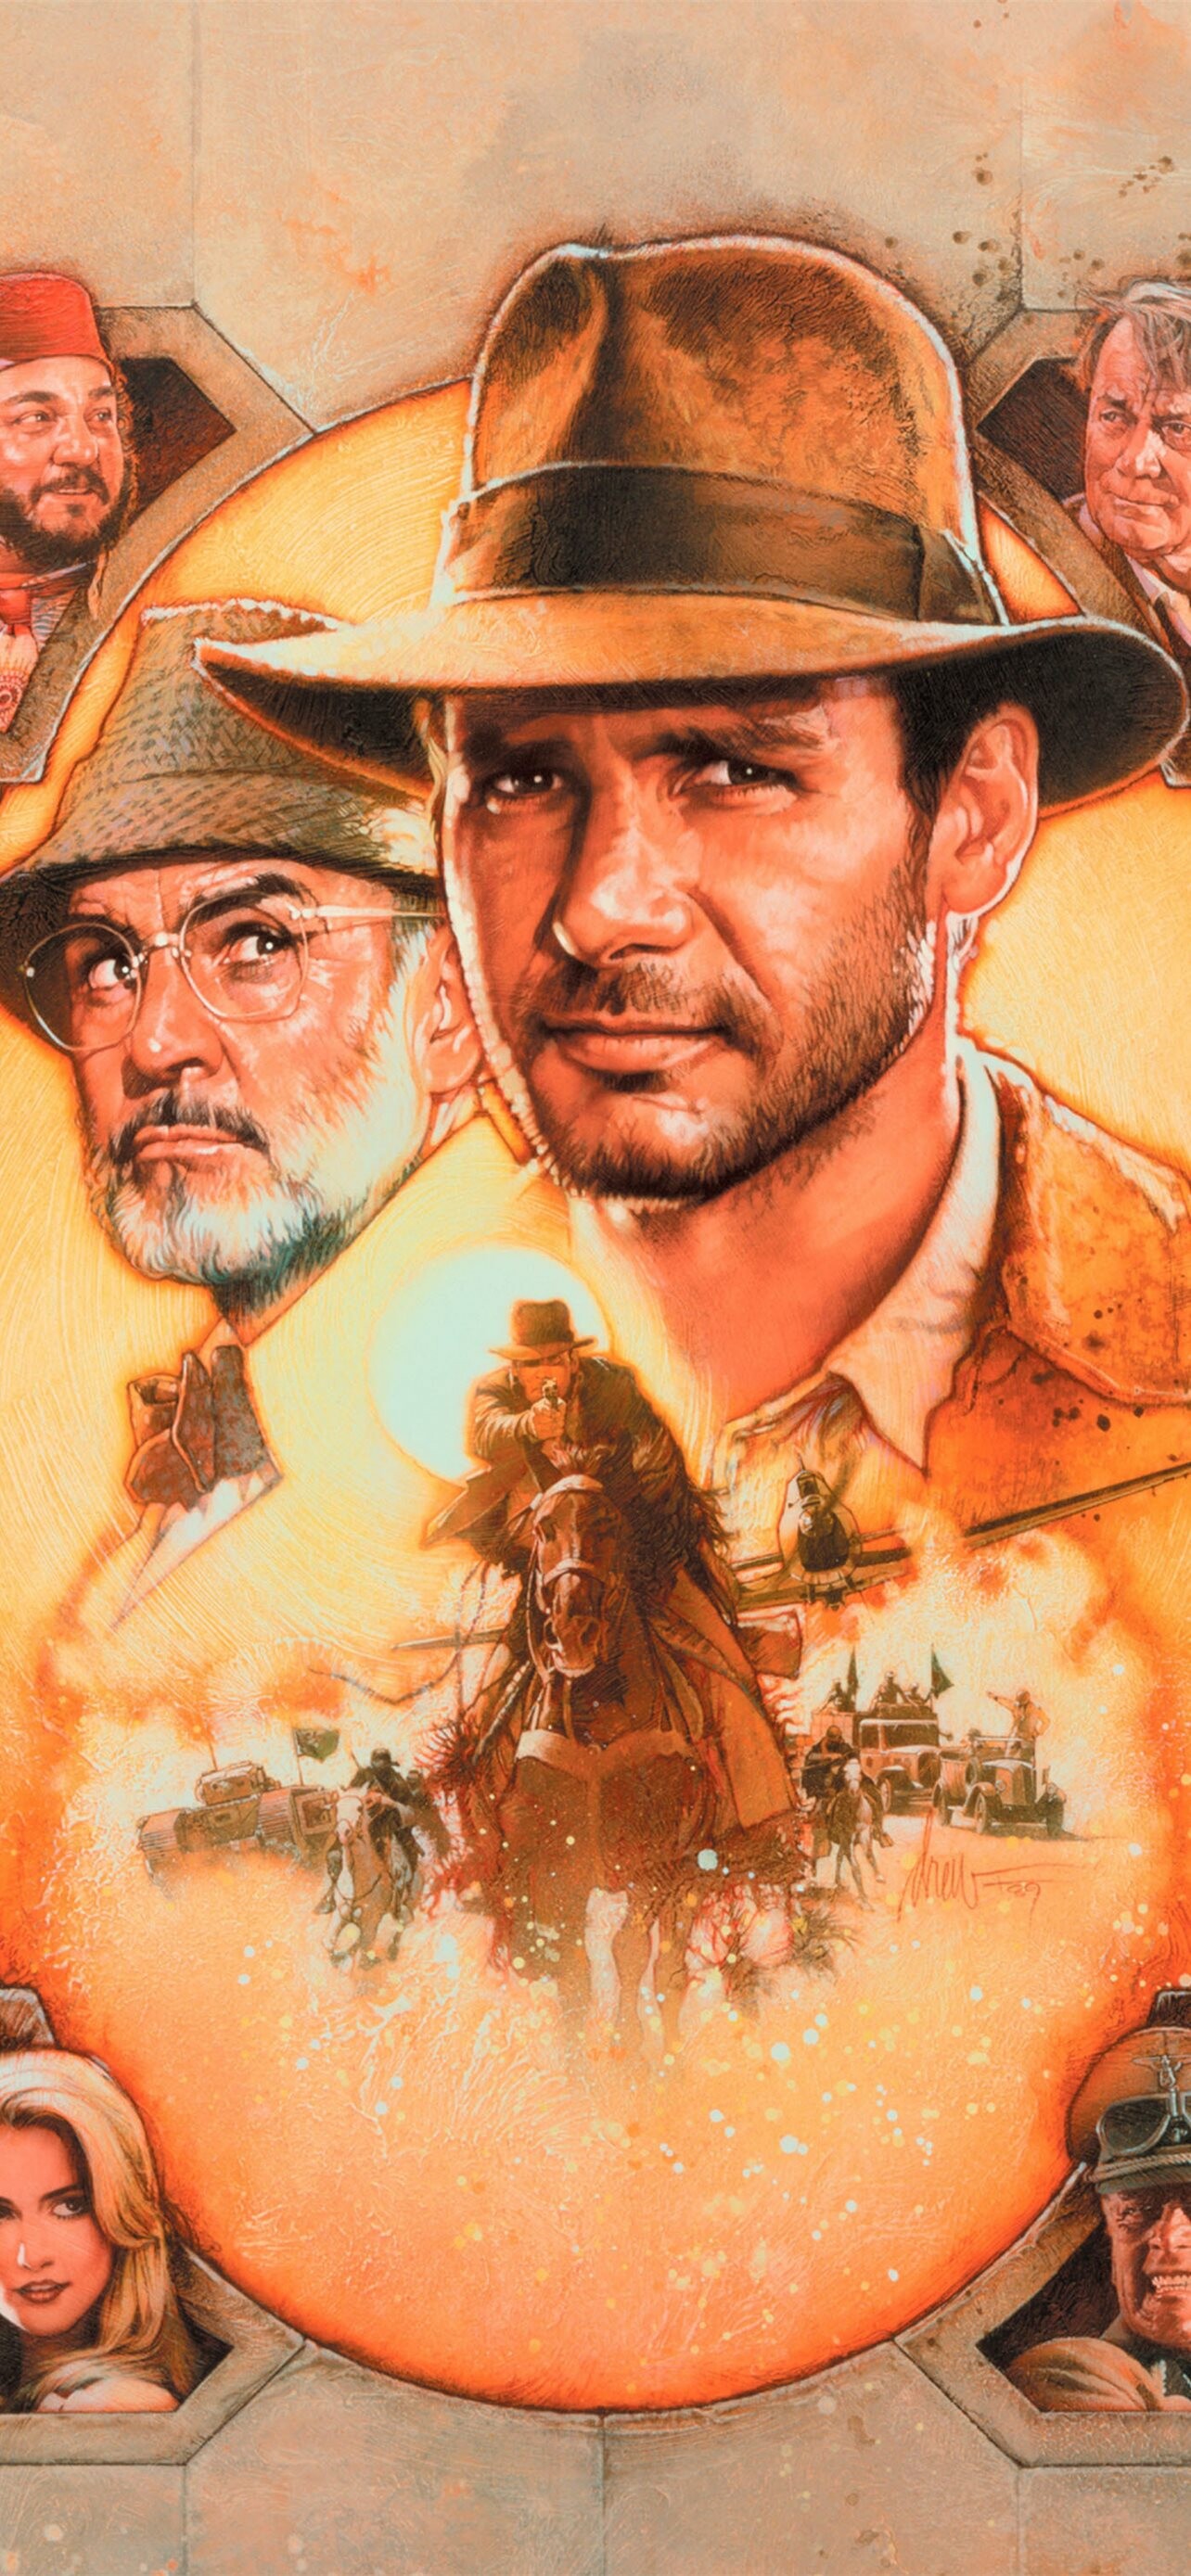 Indiana Jones: The Last Crusade, A 1989 American action-adventure film directed by Steven Spielberg. 1290x2780 HD Wallpaper.